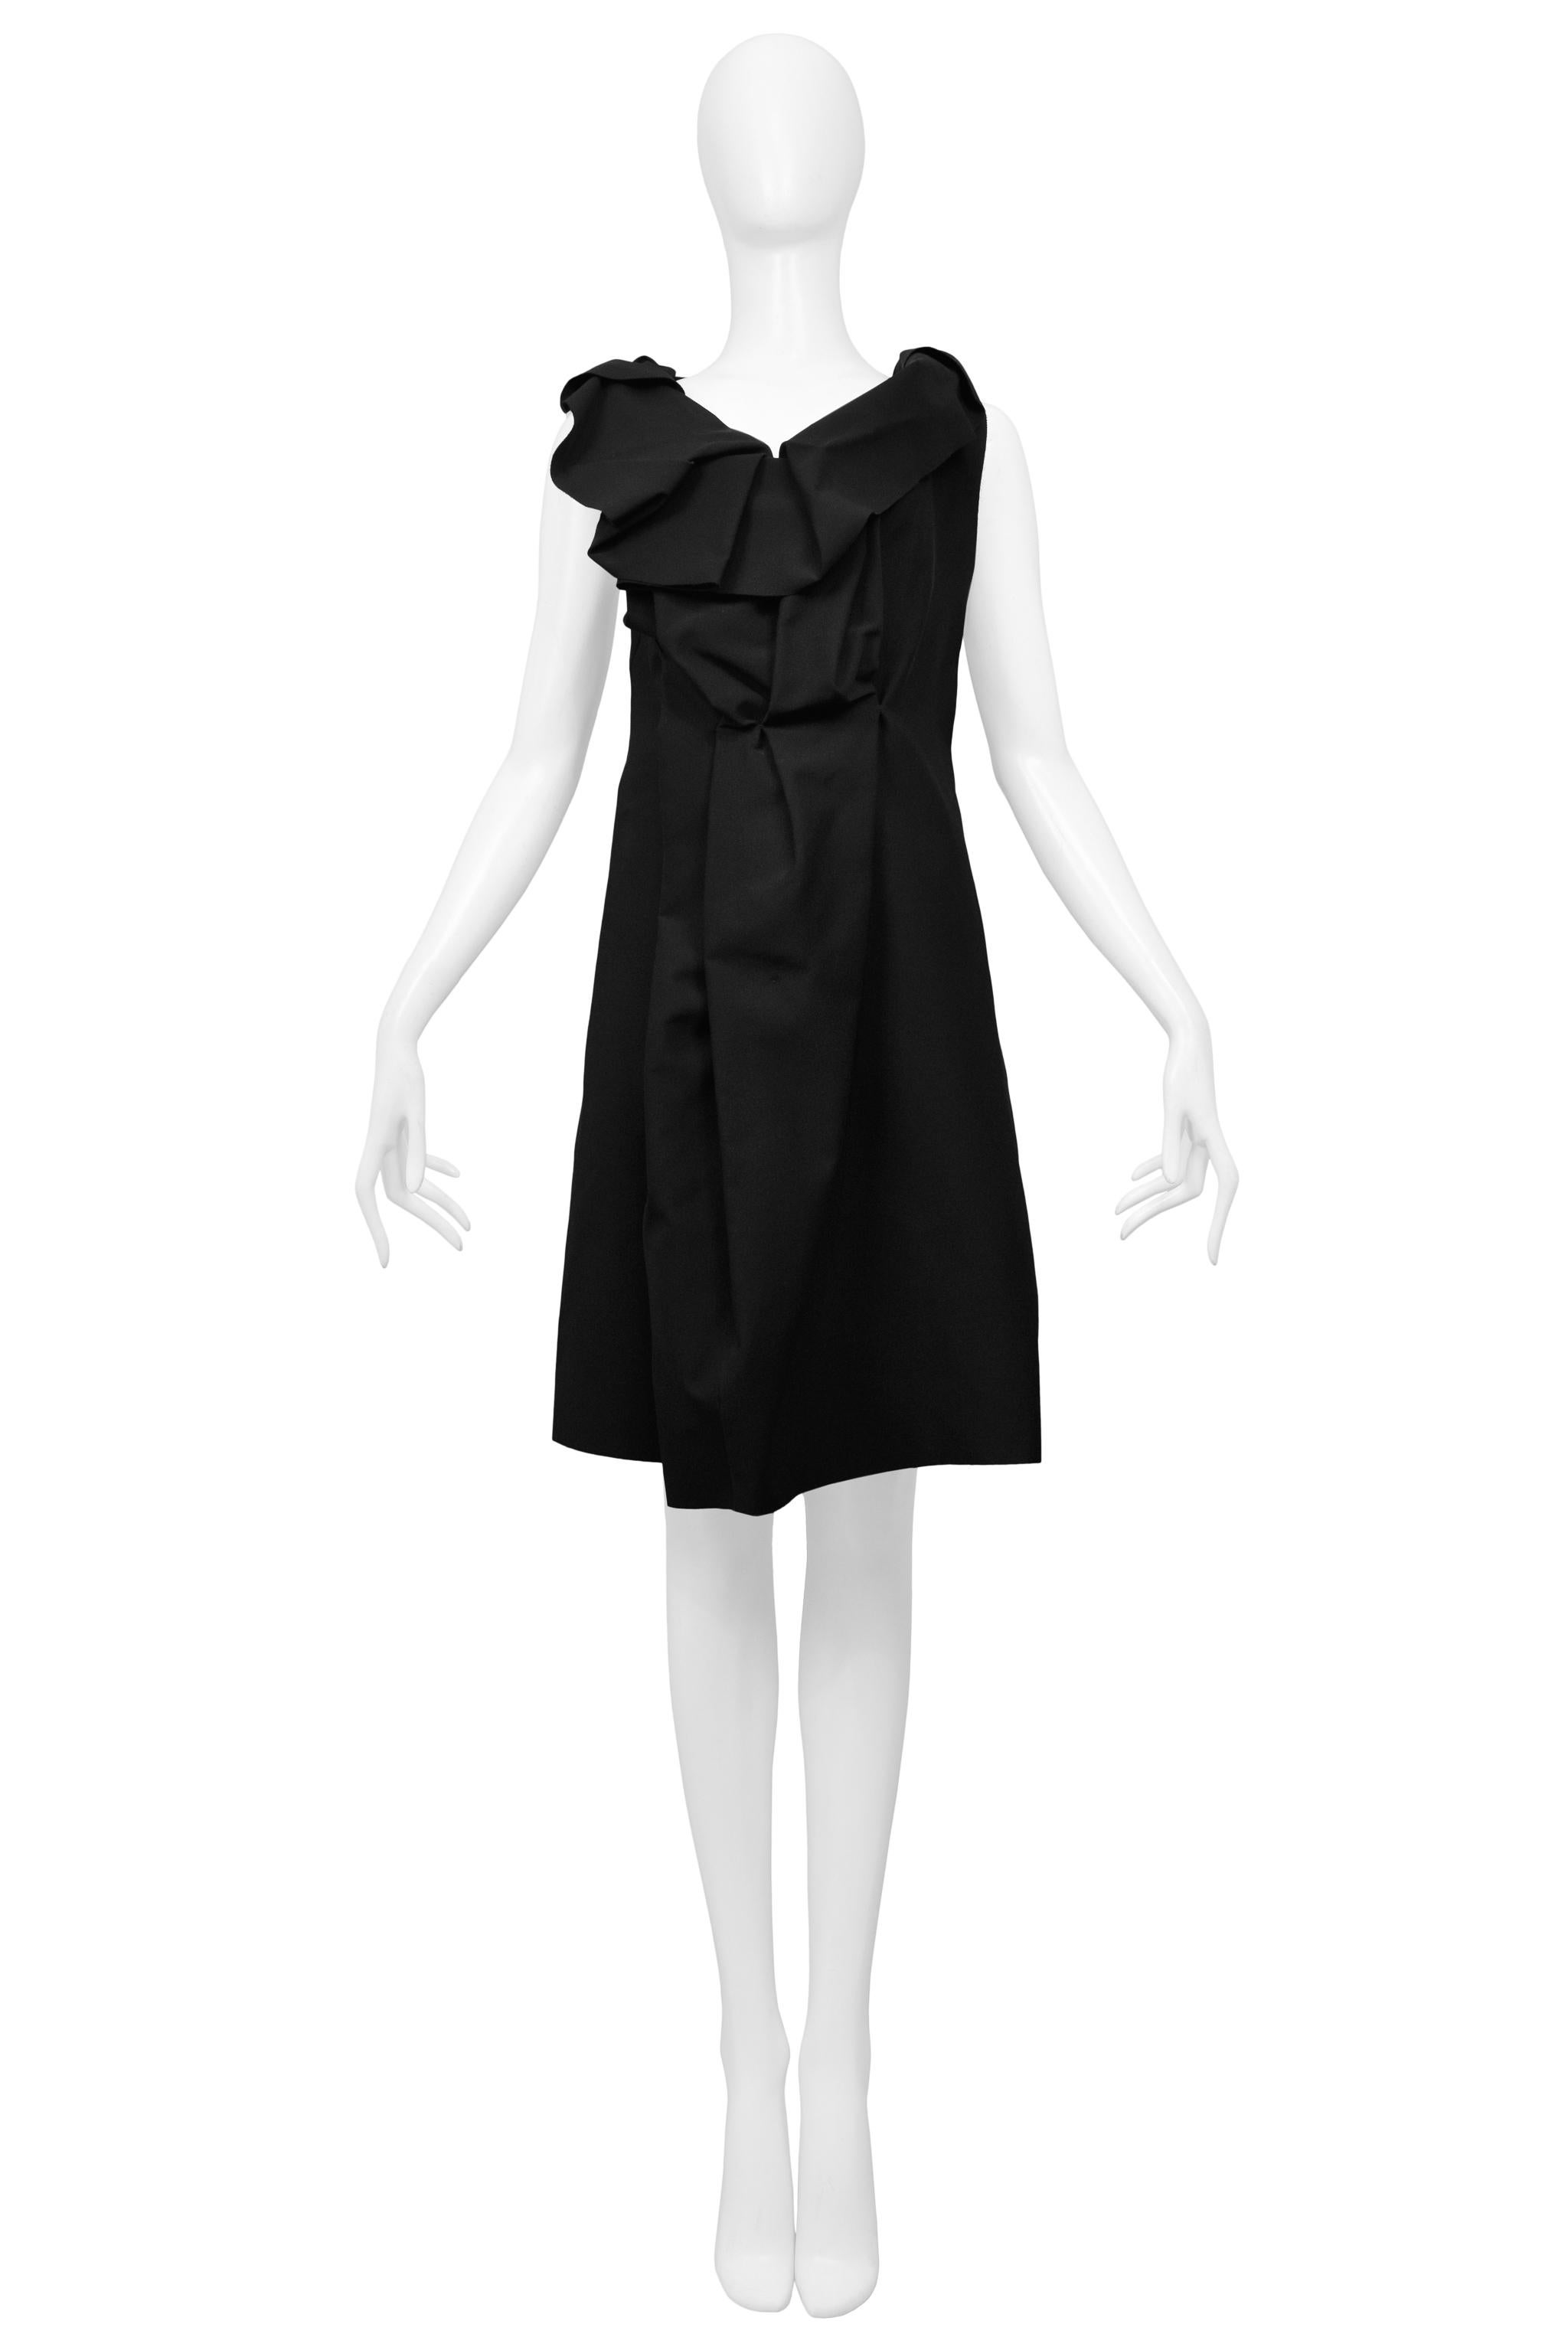 Resurrection Vintage is excited to offer a vintage Maison Martin Margiela black silk dress featuring a deconstructed ruffle yoke and front pleating.

Maison Martin Margiela
Size 42
Silk
Made in Italy
Excellent Vintage Condition
Authenticity